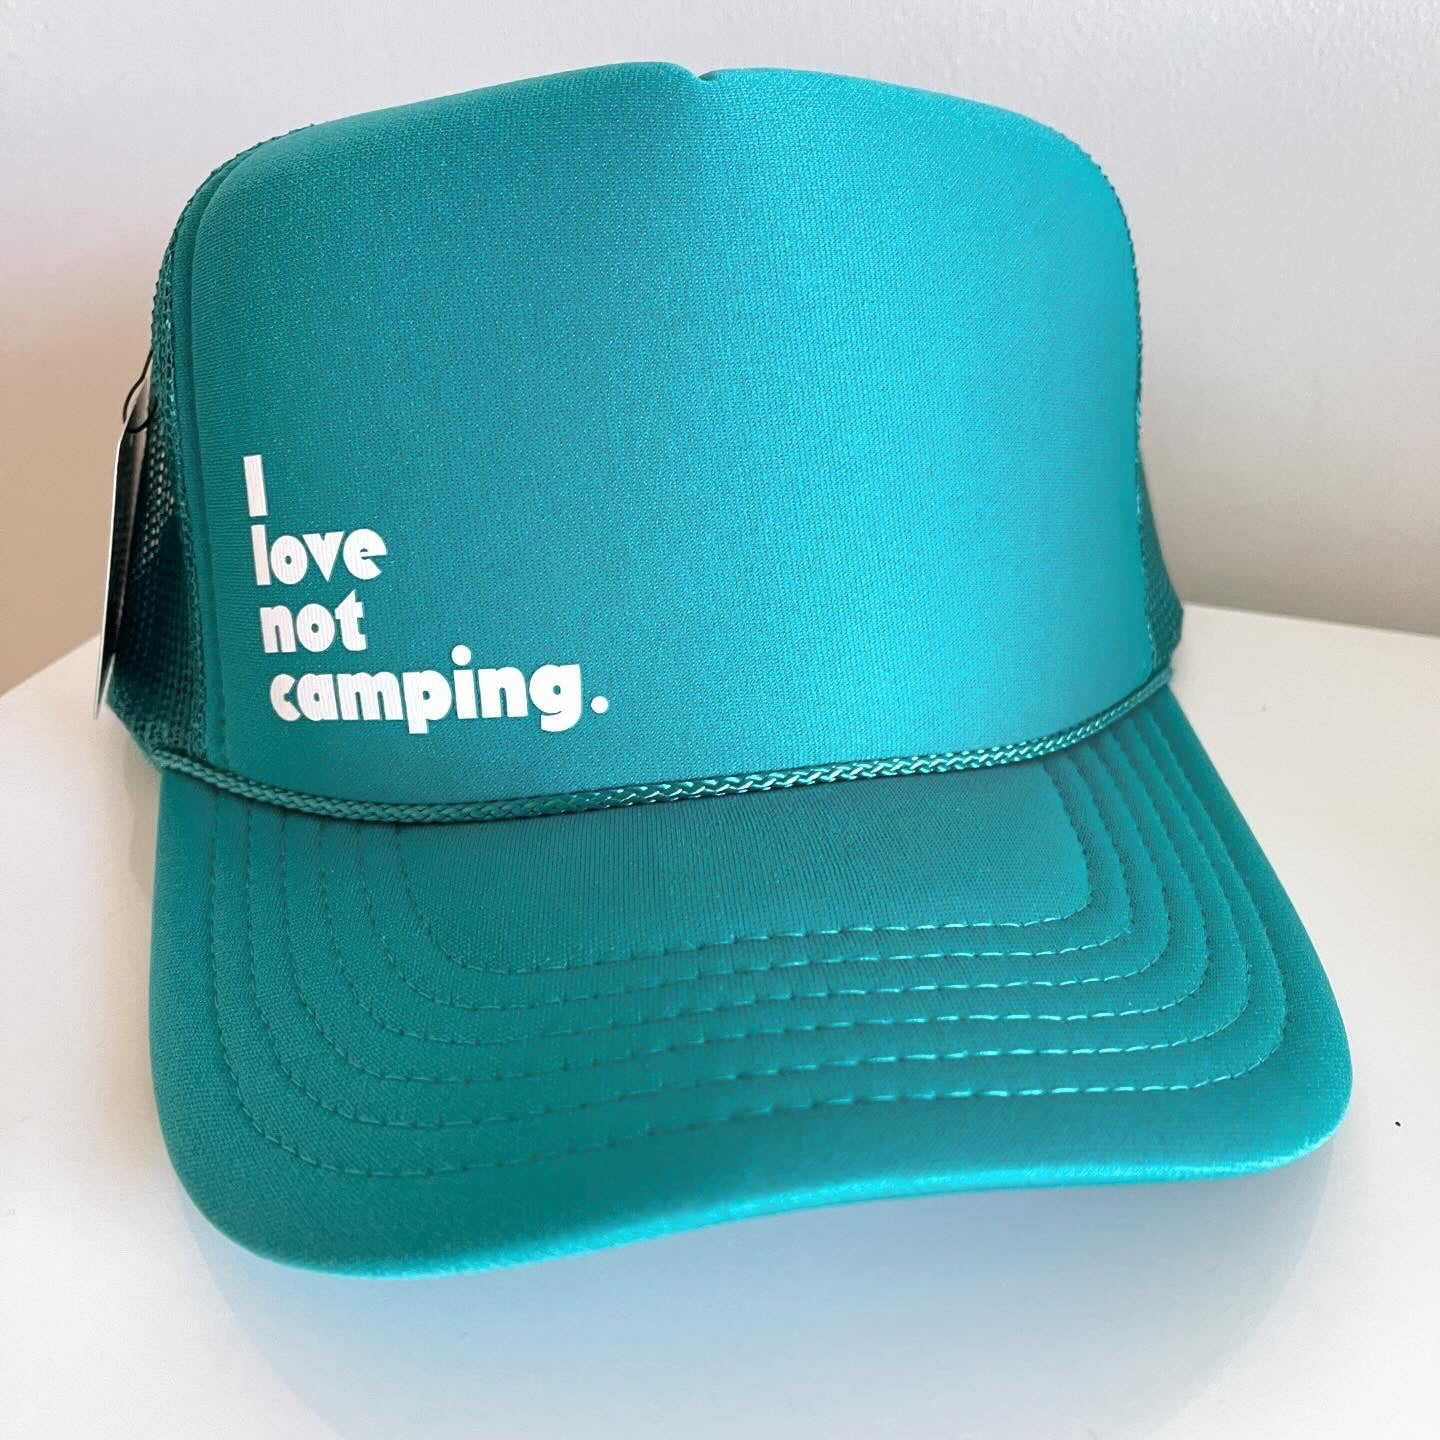 I love not camping. New design.